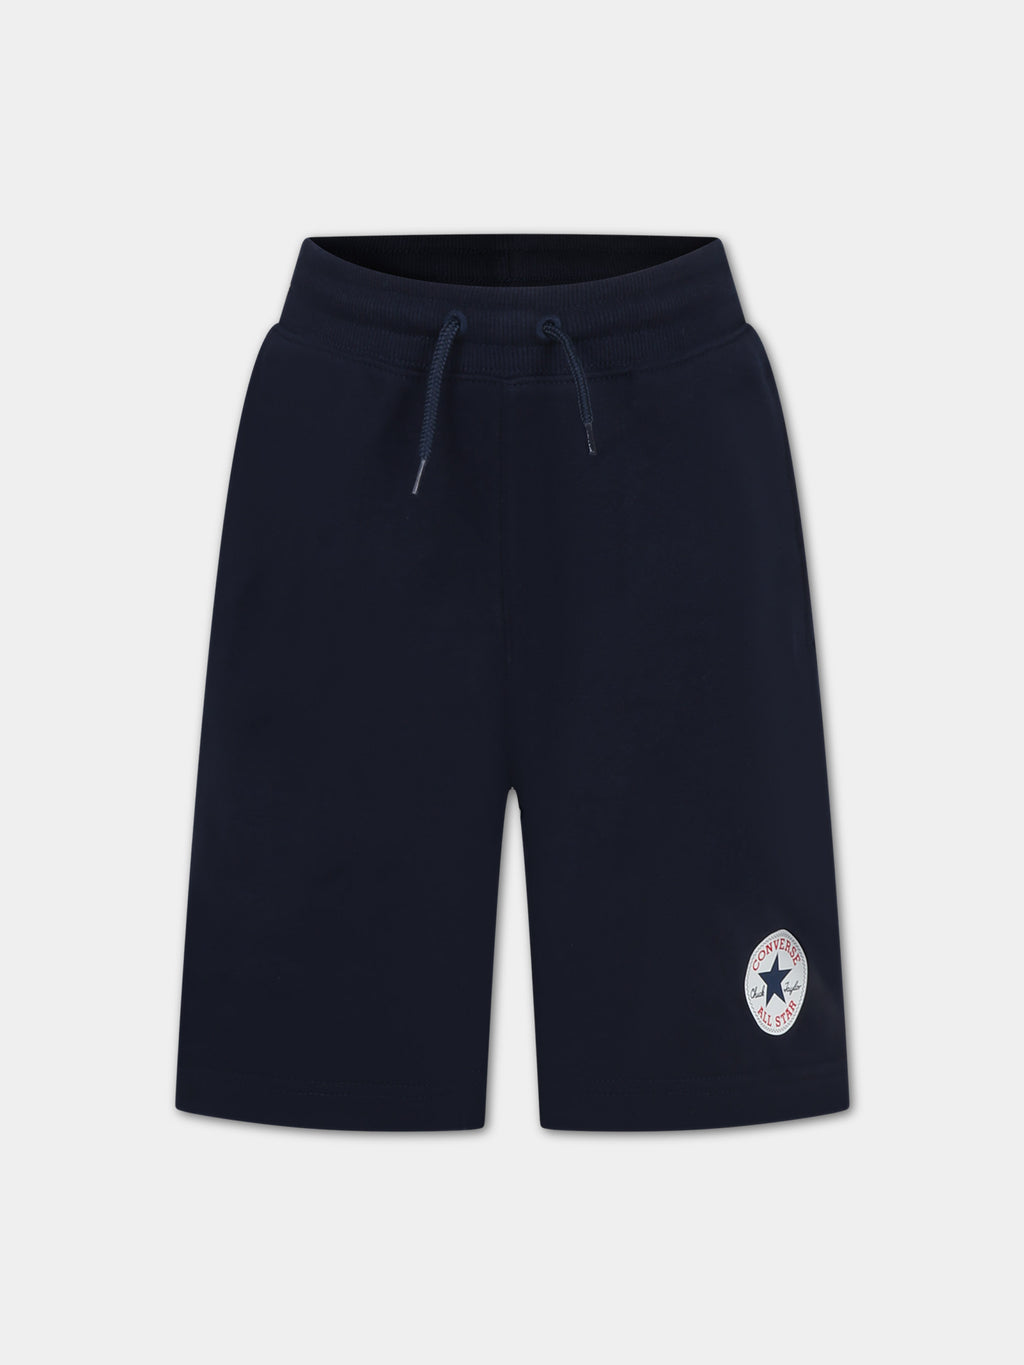 Blue shorts for boy with logo